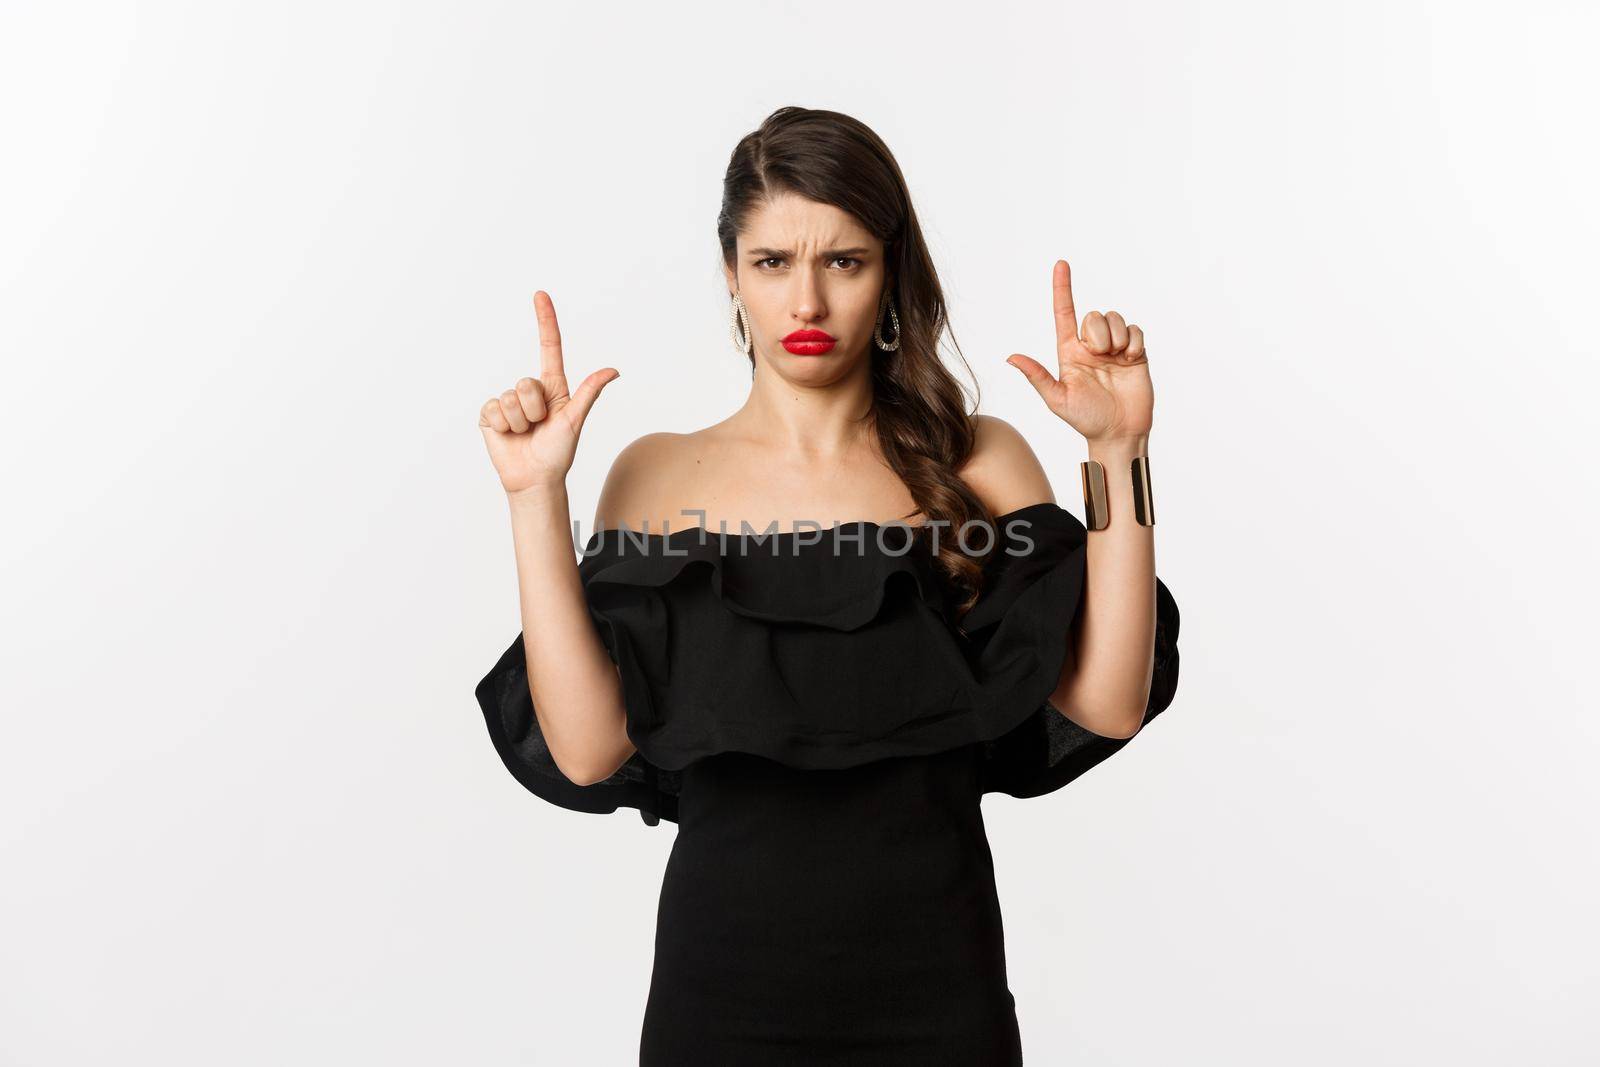 Fashion and beauty. Disappointed woman sulking upset, pointing fingers up and complaining, standing dissatisfied in black dress, white background.